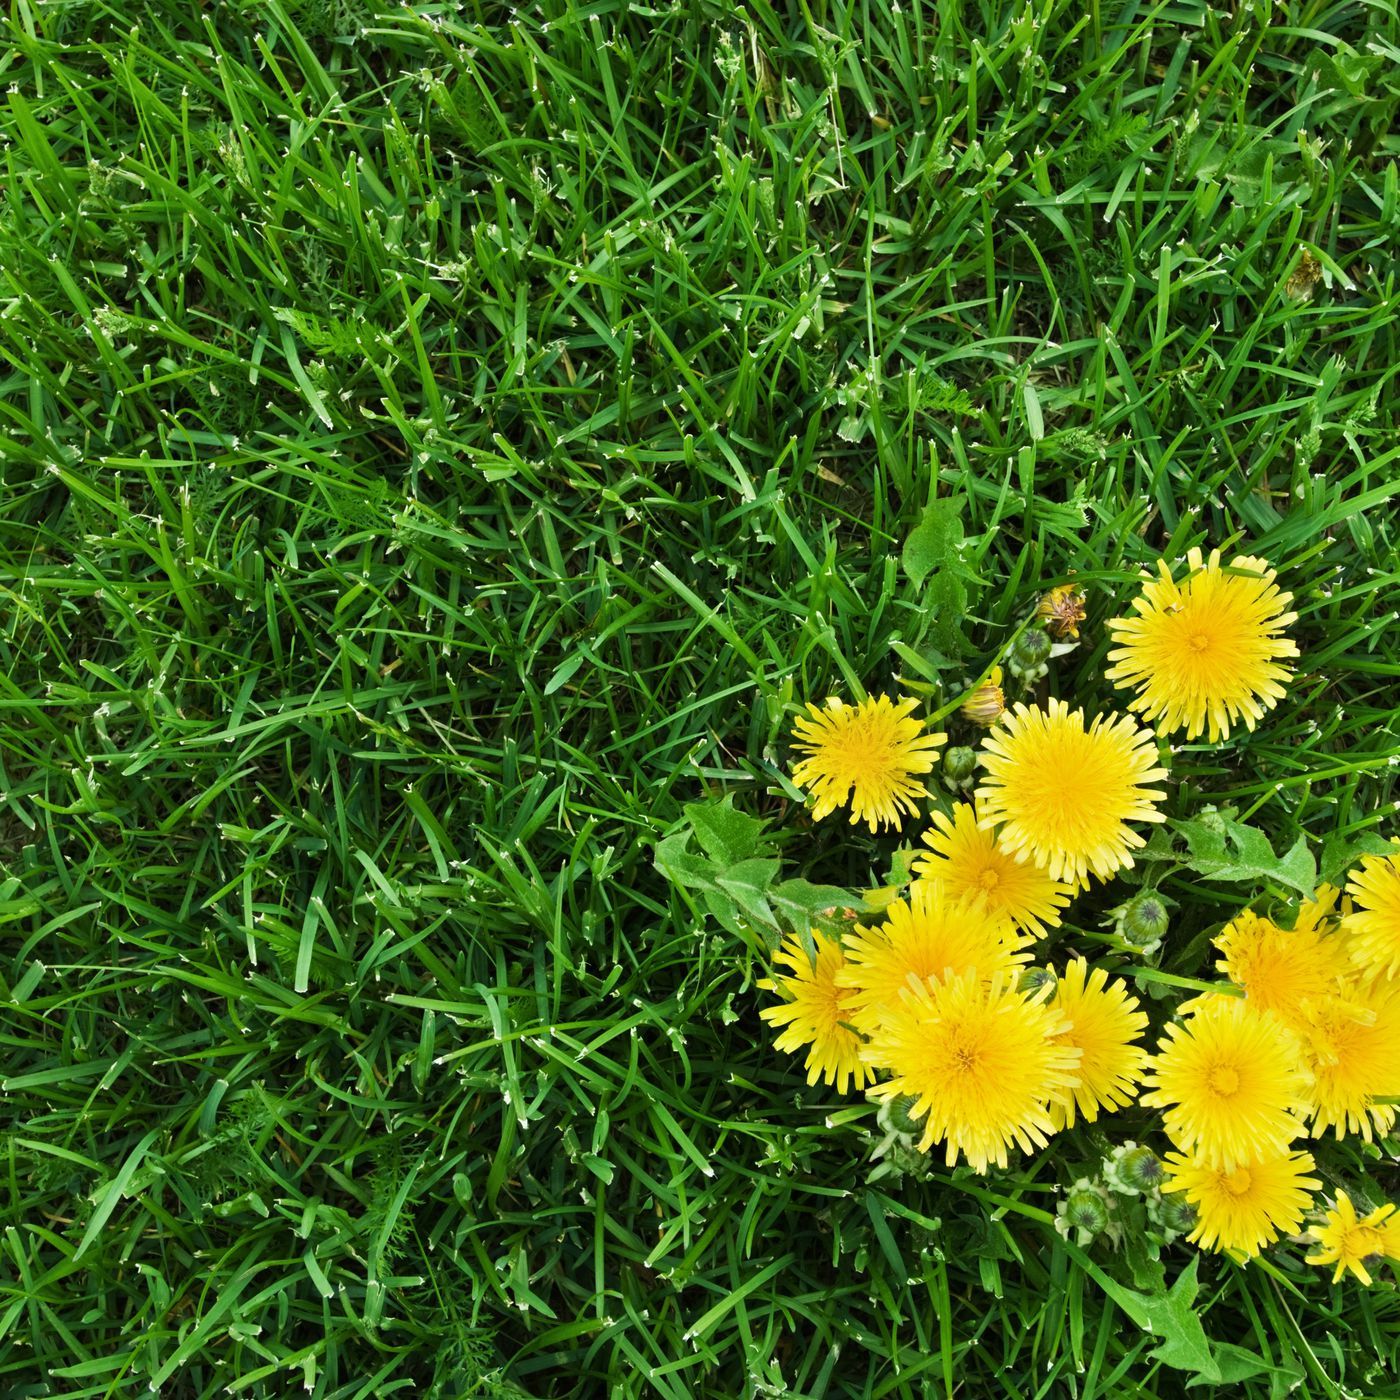 To preserve the general health and wellness of your plants and lawn, professional weed control services can help. Here's how to take control.